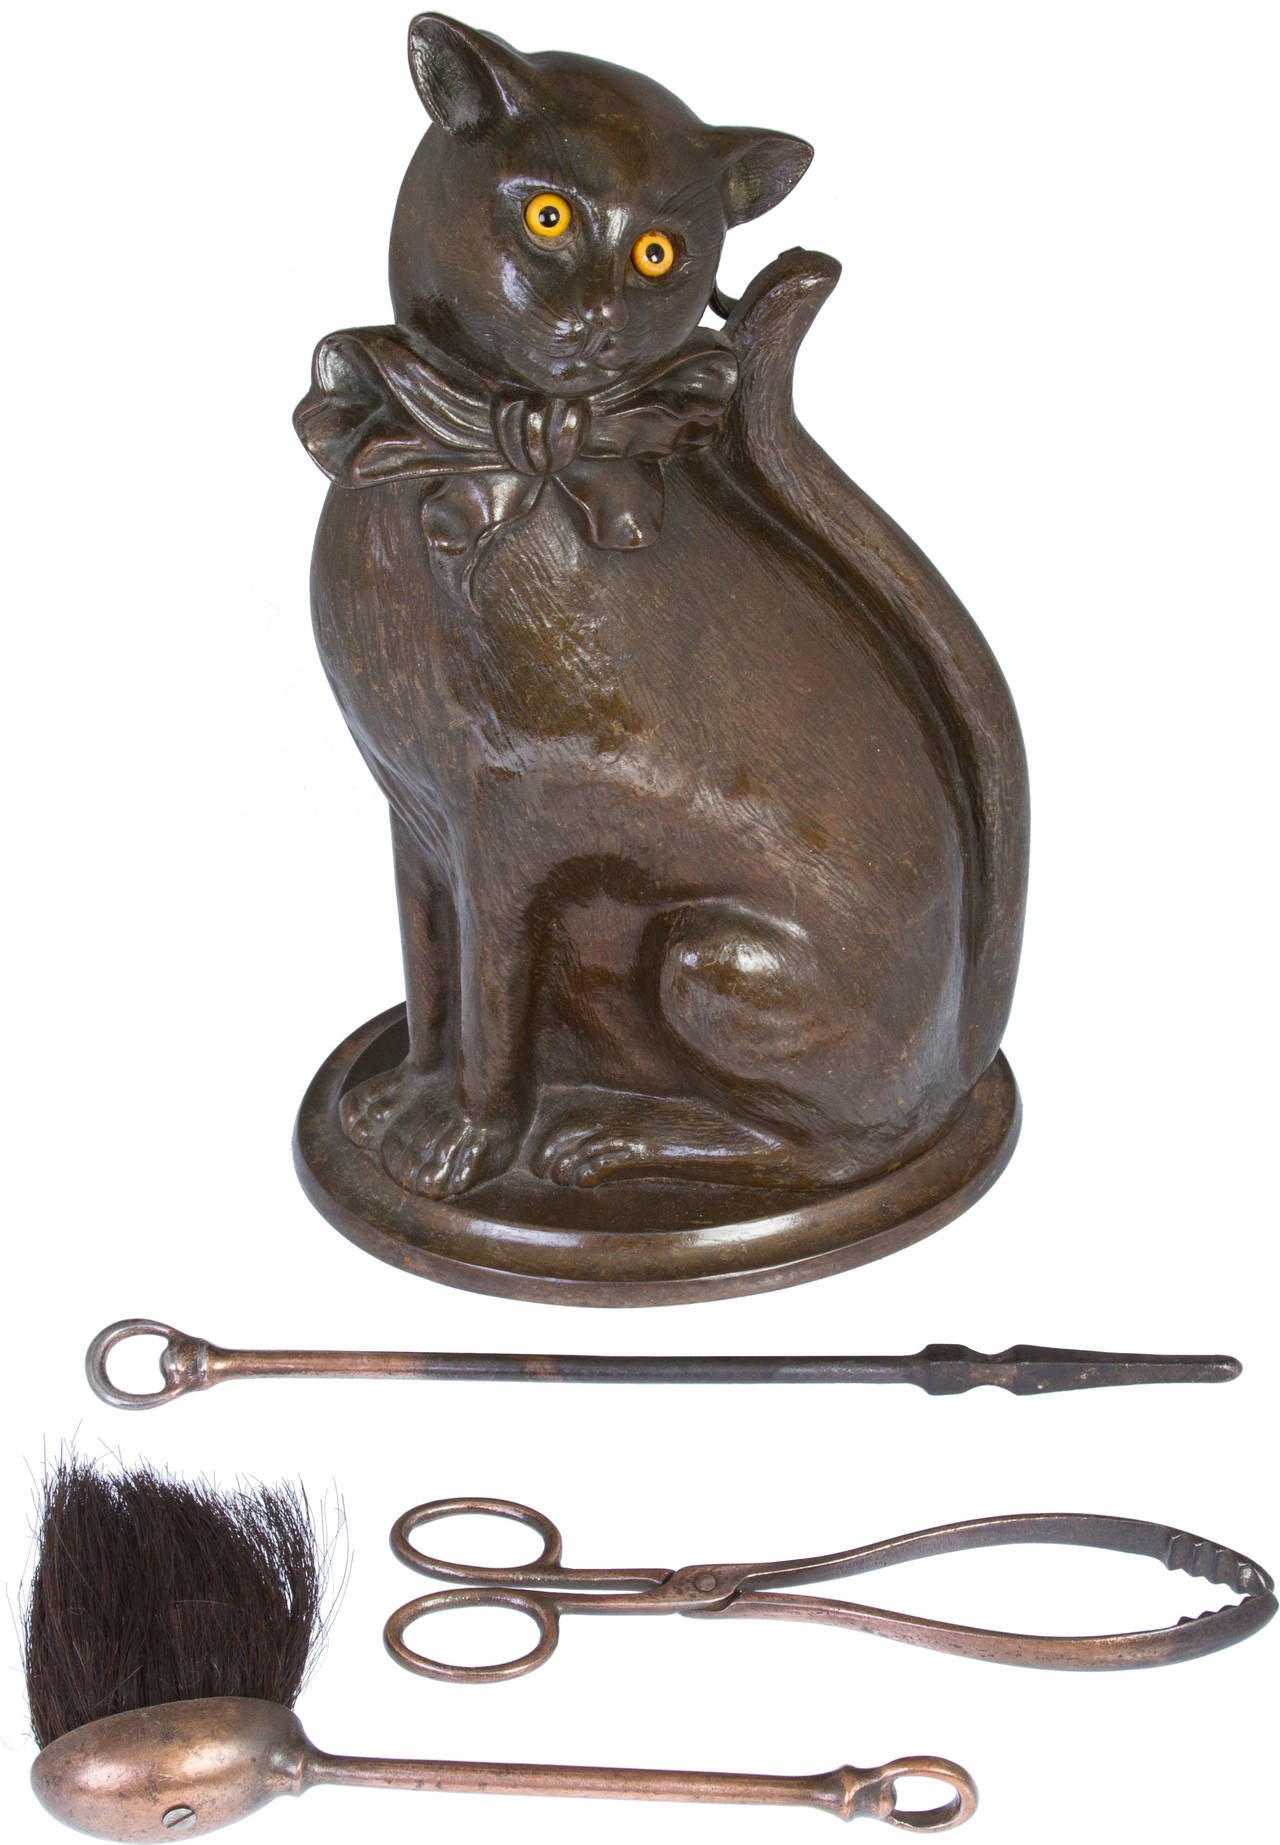 This bronze cat with glass eyes was made in England with the signature of Harry Banks BWS. Numbered 139 and inscribed on the back 